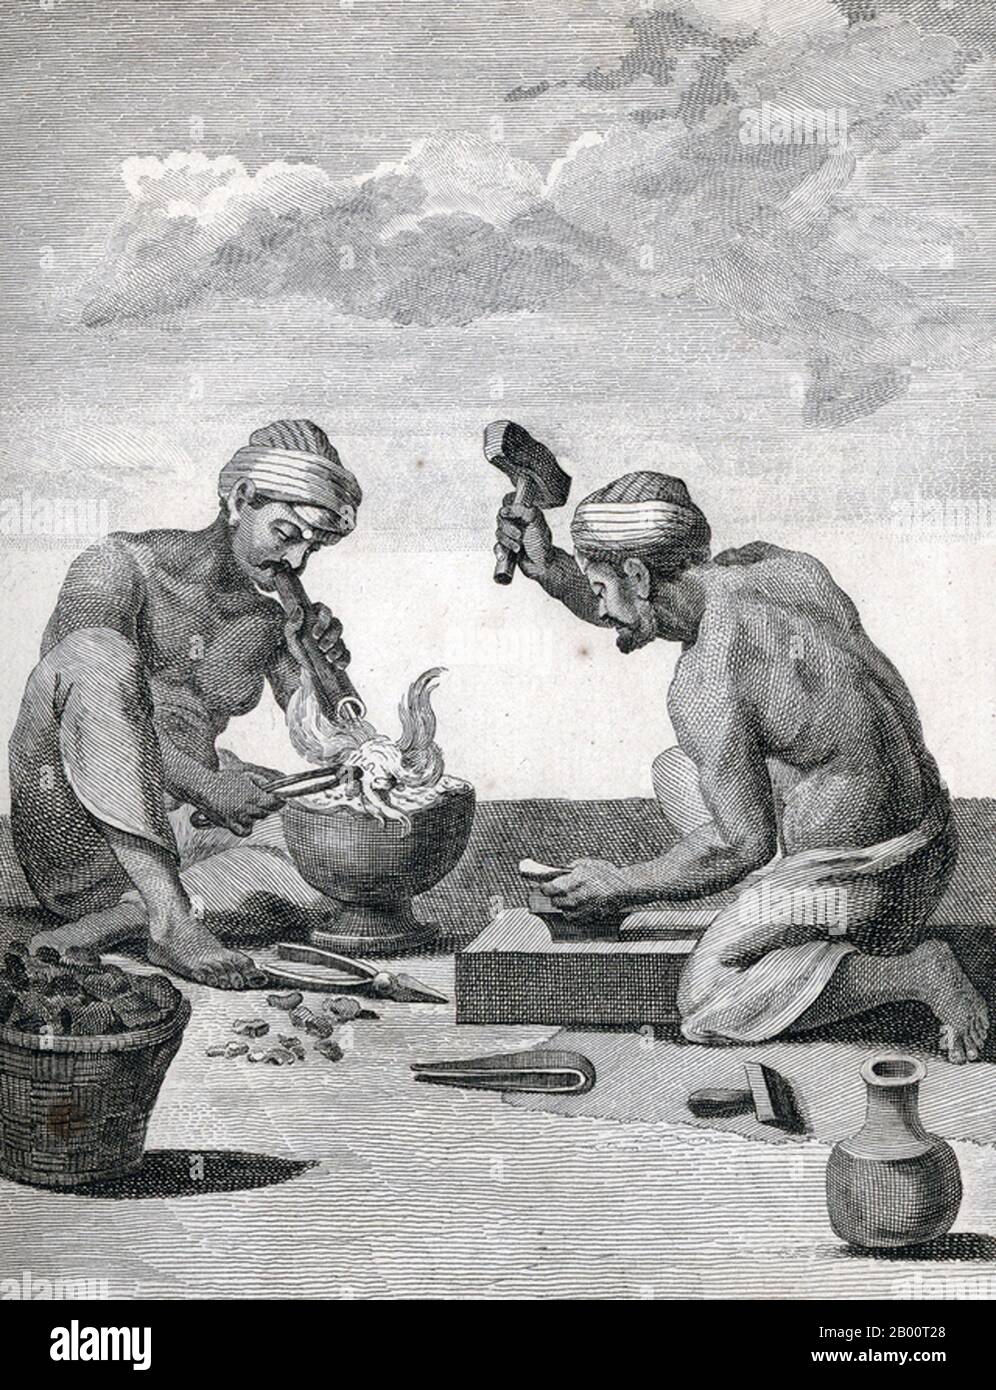 India/France: 'Two Goldsmiths'. Engraving by Pierre Sonnerat (1748-1814), 1782.  Pierre Sonnerat (1748-1814) was a French naturalist and explorer who made several voyages to Southeast Asia between 1769 and 1781. He published this two-volume account of his voyage in 1782.  Volume 1 deals exclusively with India, whose culture Sonnerat very much admired, and is especially noteworthy for its extended discussion of religion in India, Hinduism in particular. Volume 2 covers Sonnerat’s travels to China, Burma, Madagascar, the Maldives, Mauritius, Ceylon, Indonesia and the Philippines. Stock Photo